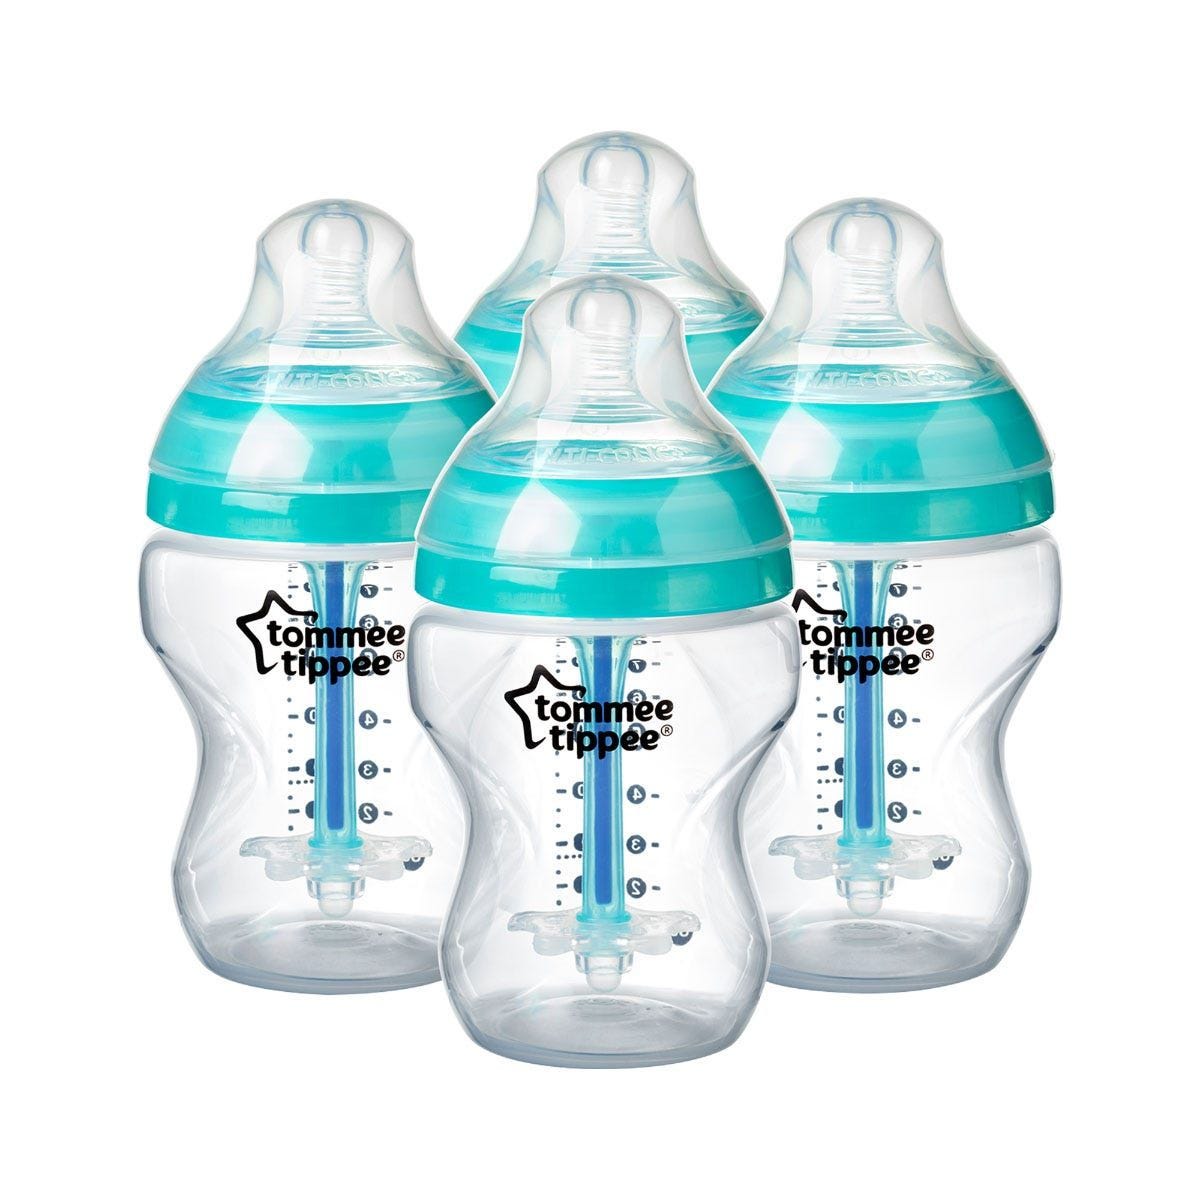 New Tommee Tippee Advanced Anti Colic Bottles with heat sensing tube 260ml 0m+ 